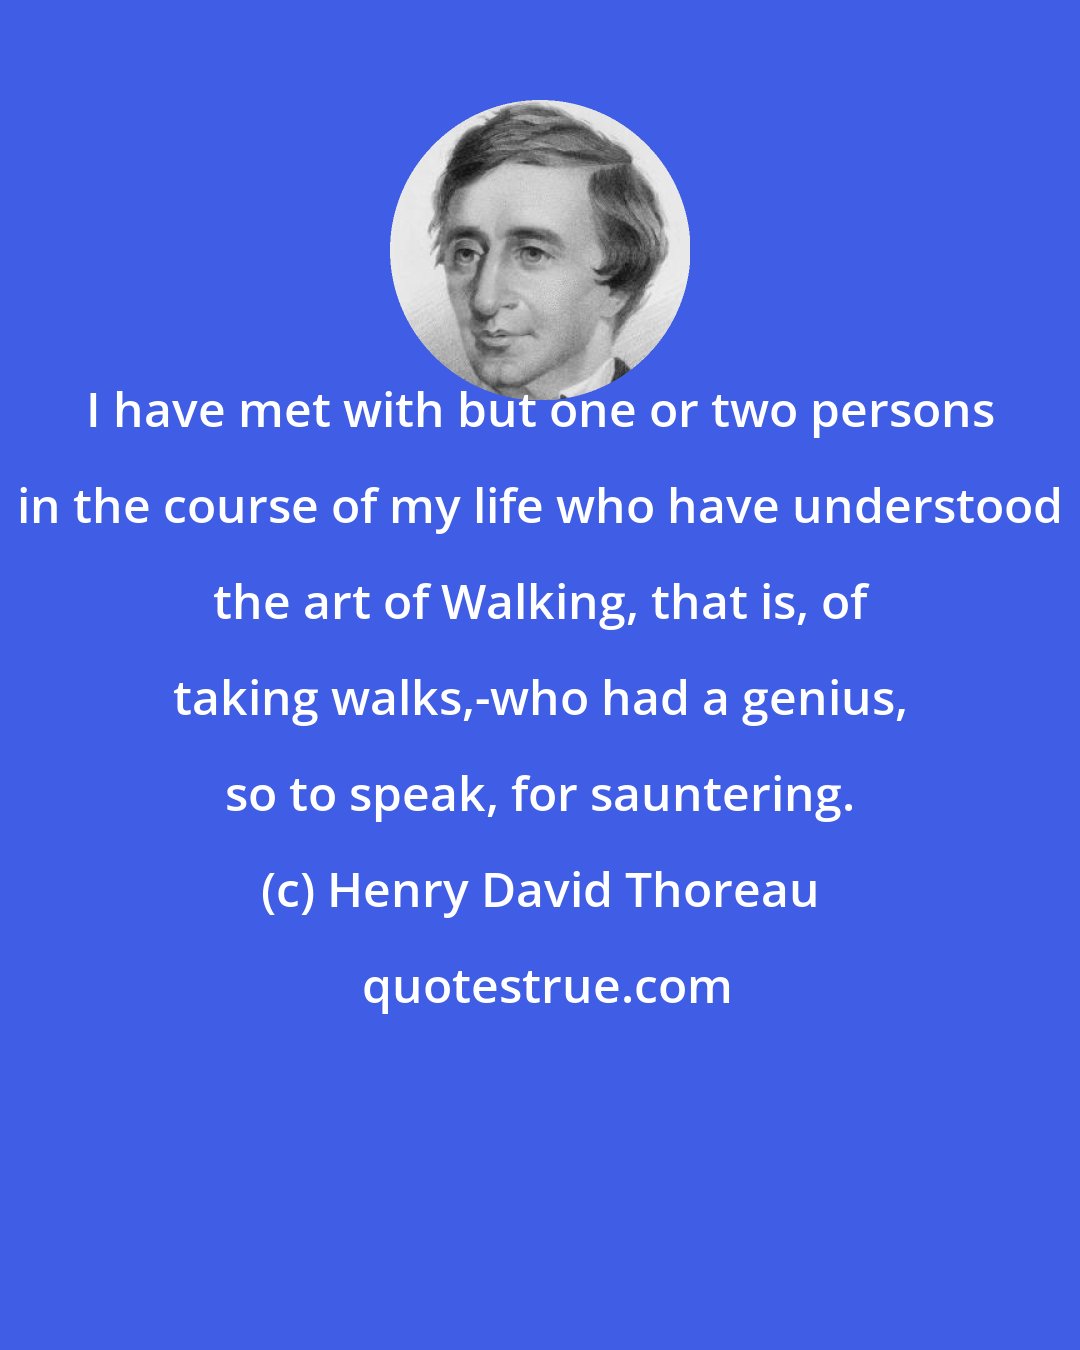 Henry David Thoreau: I have met with but one or two persons in the course of my life who have understood the art of Walking, that is, of taking walks,-who had a genius, so to speak, for sauntering.